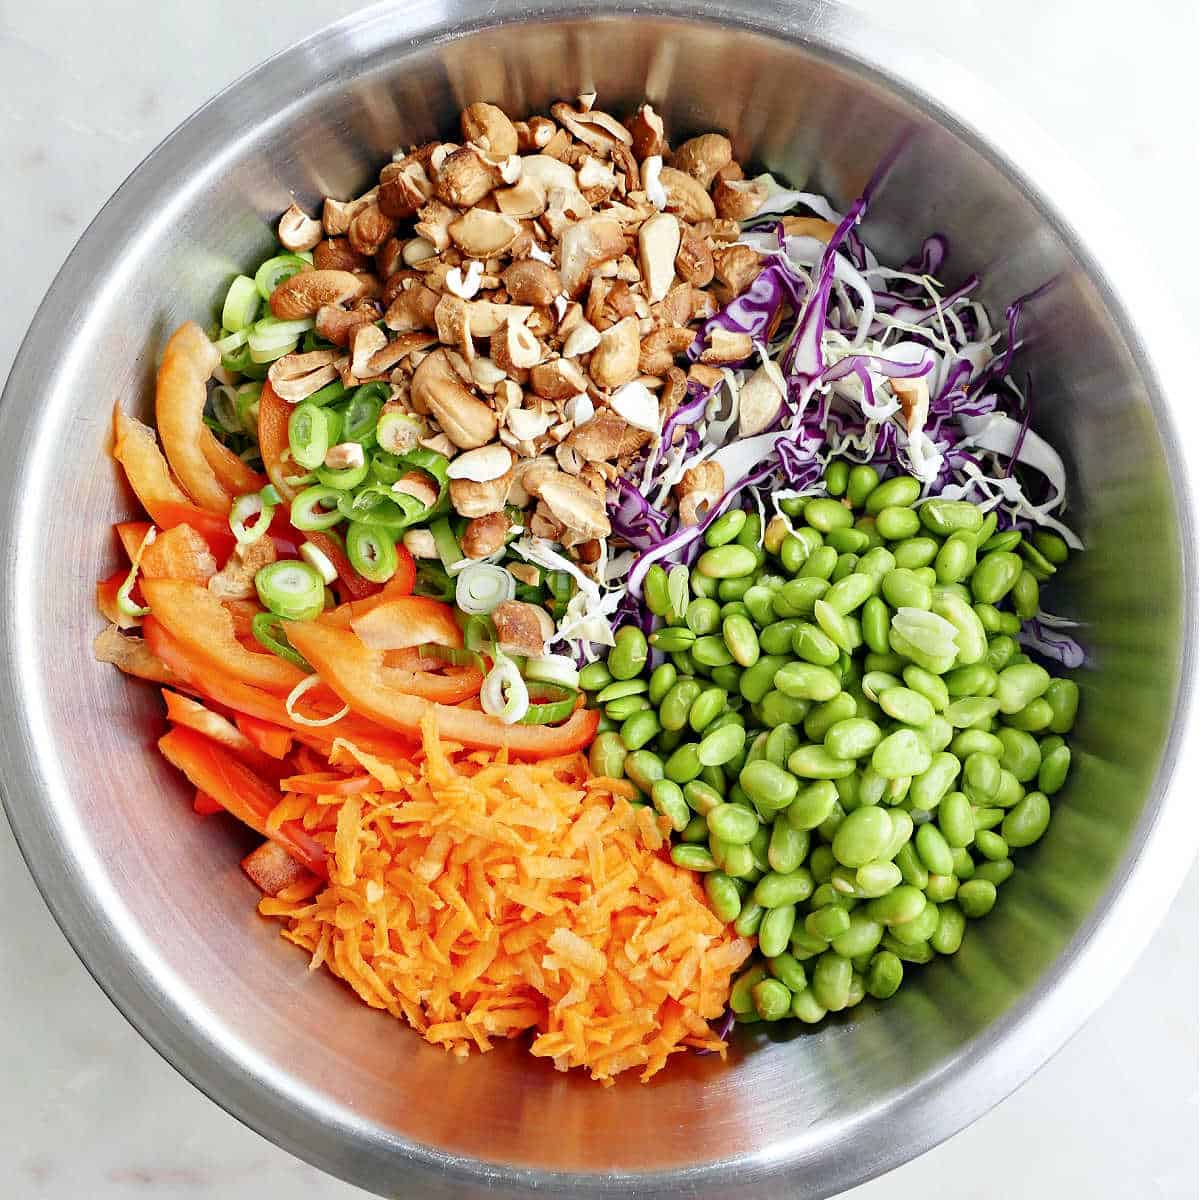 carrots, bell pepper, green onion, cashews, cabbage, and edamame in a mixing bowl